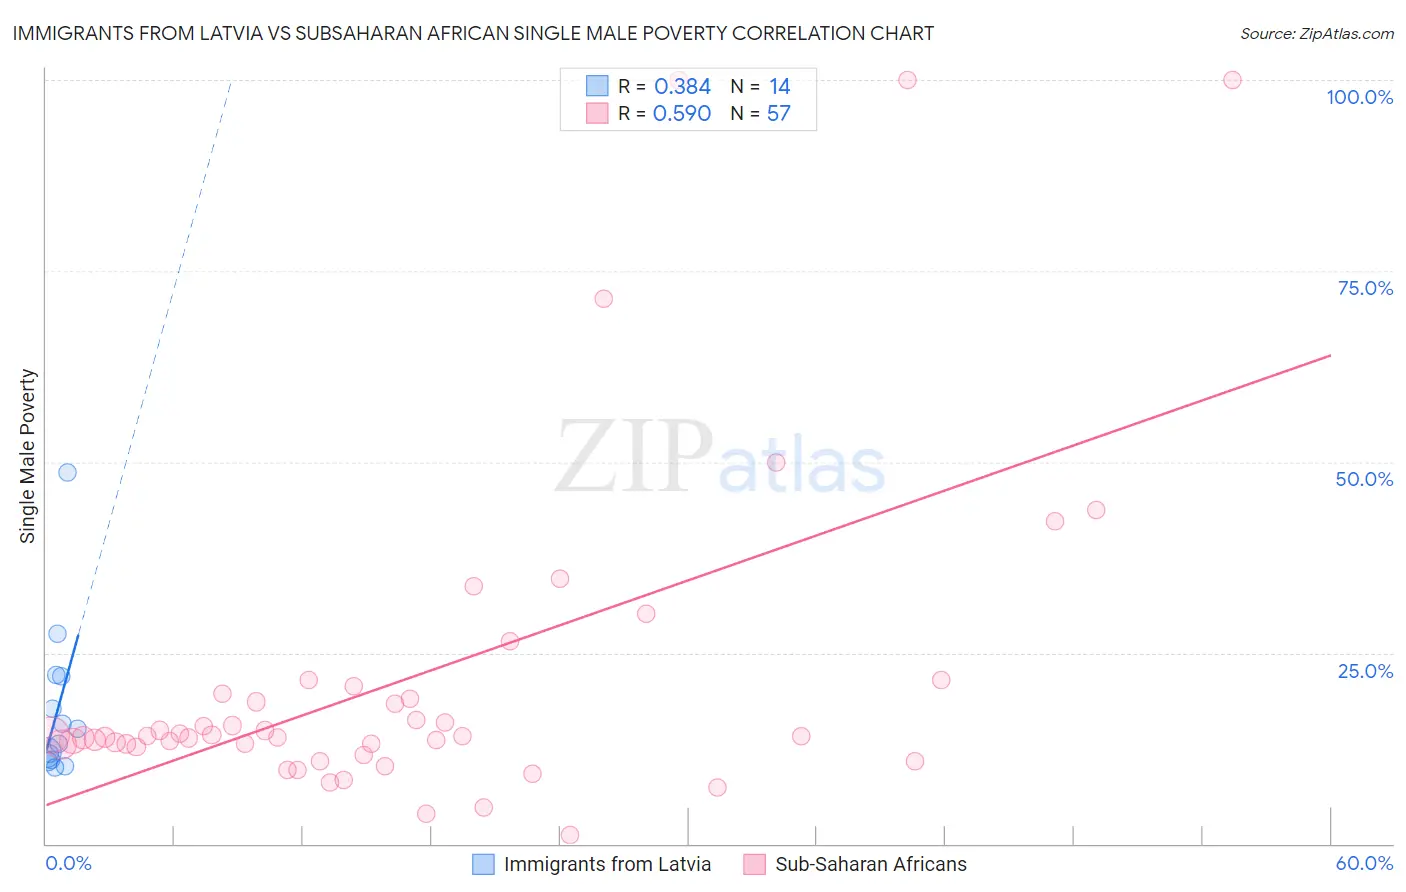 Immigrants from Latvia vs Subsaharan African Single Male Poverty